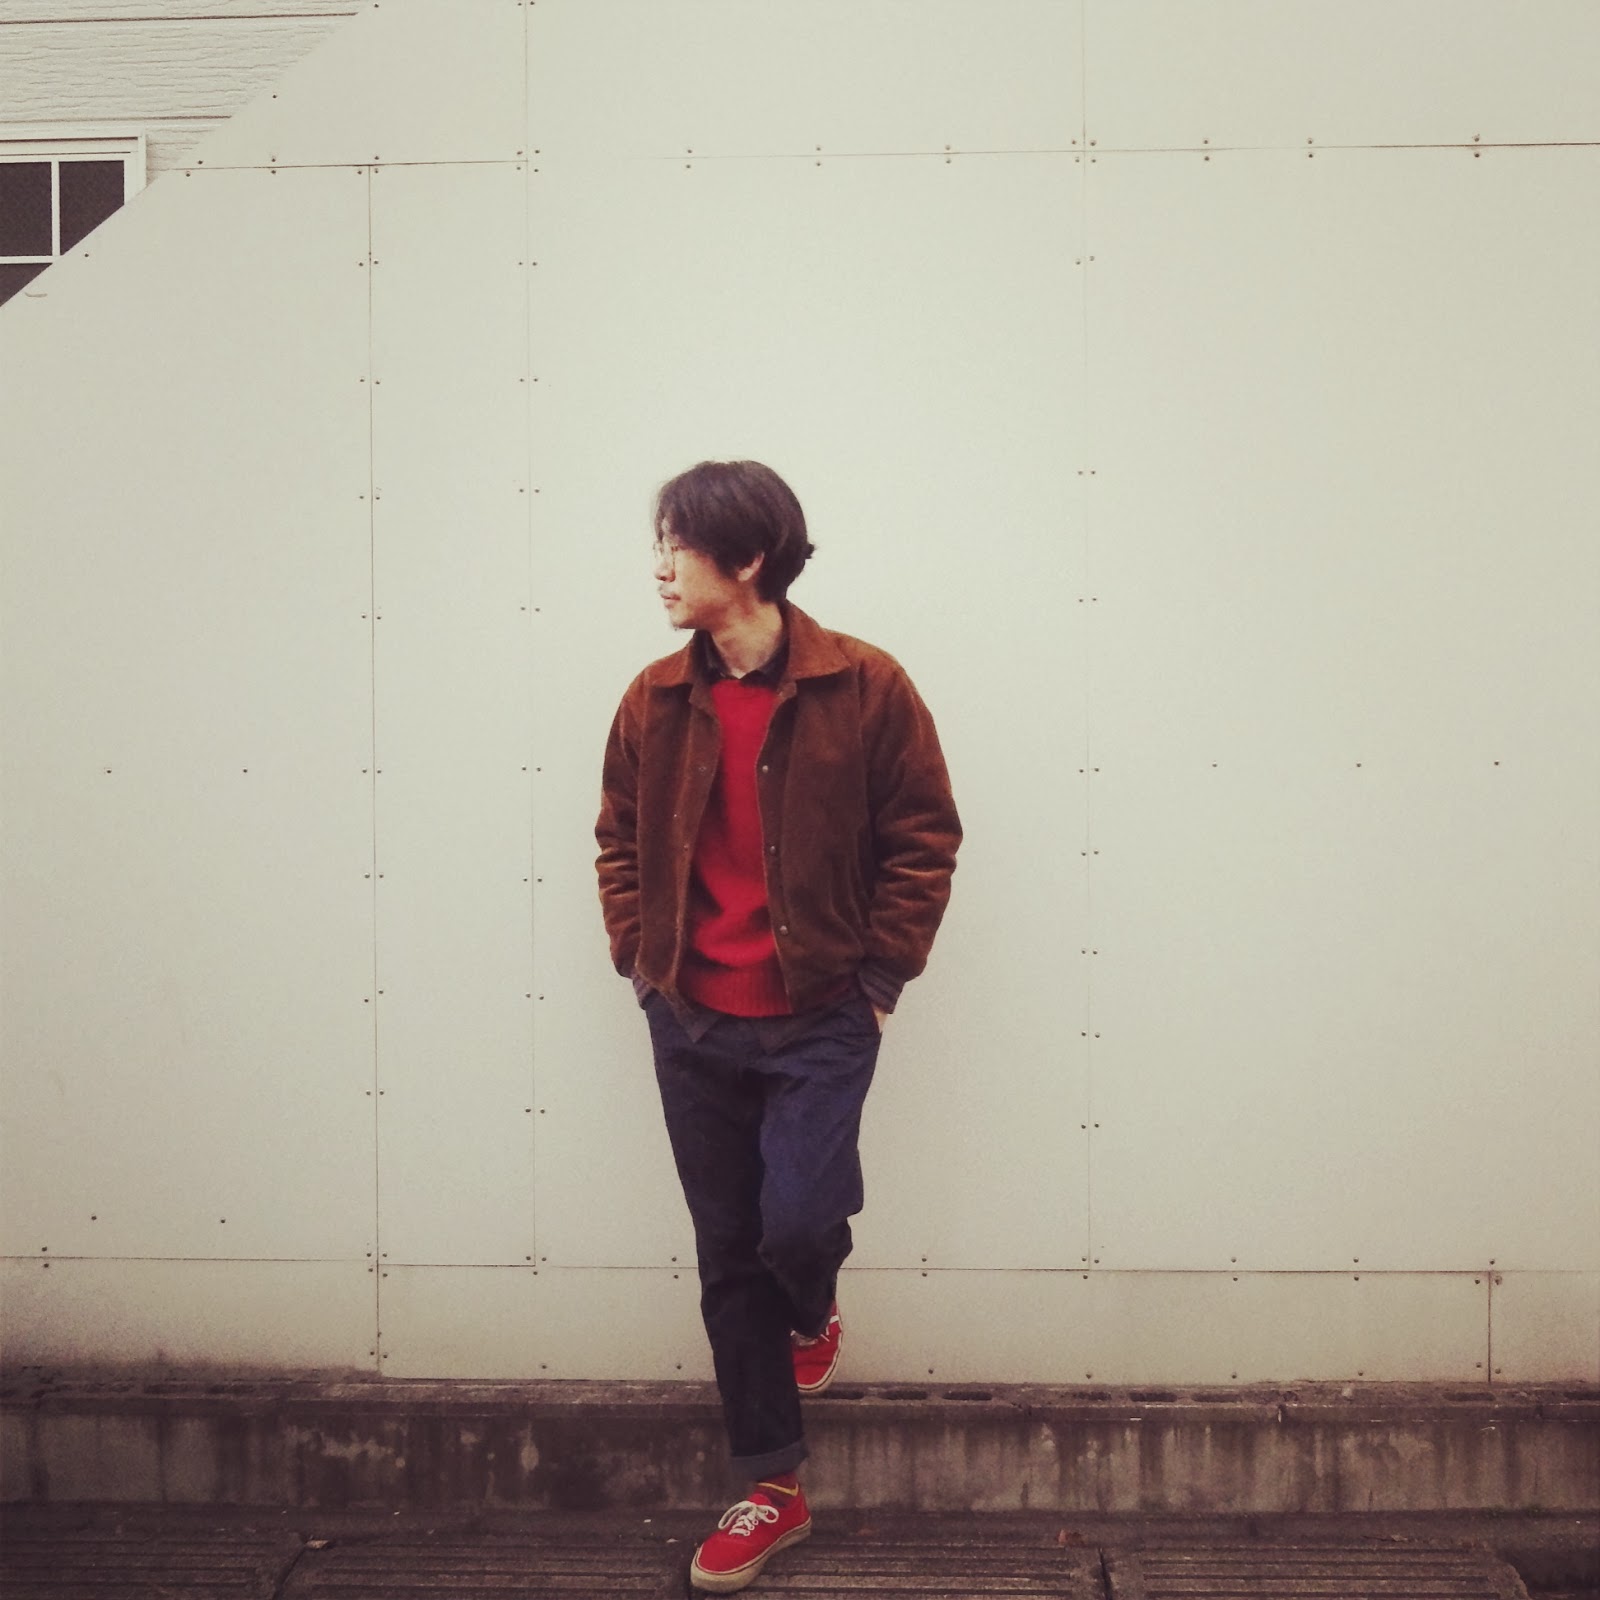 twelve mens staff blog: BROWN by 2-tacs private SNAP